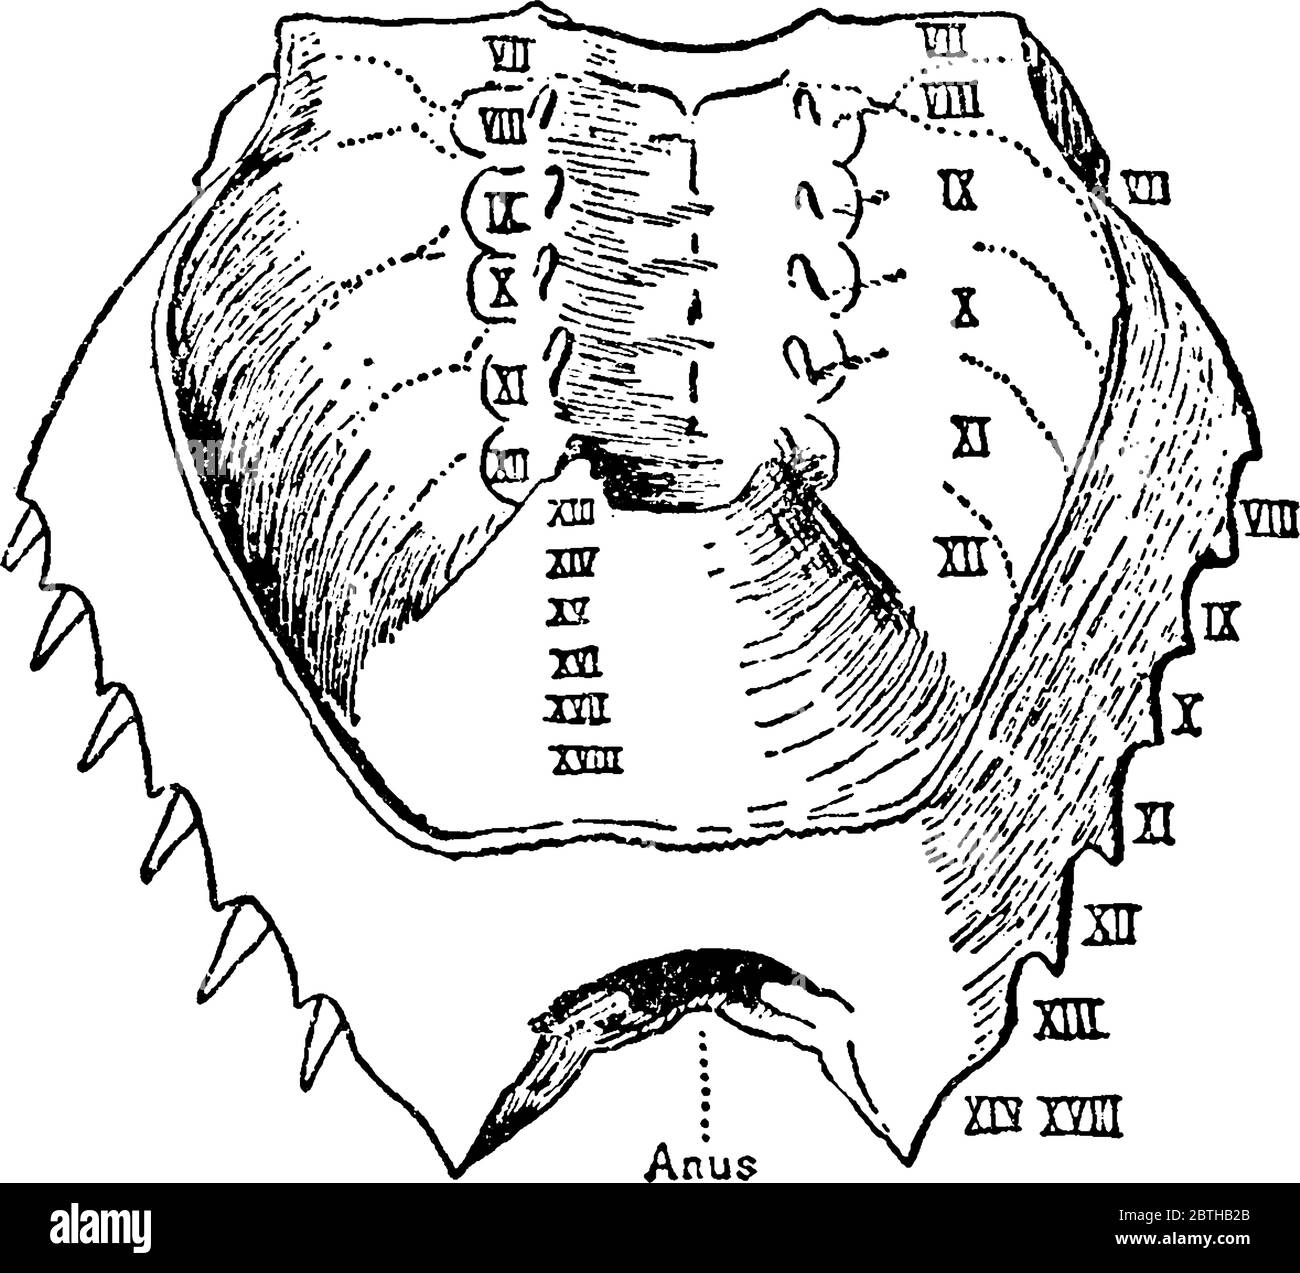 A typical representation of the ventral view of the posterior carapace or meso-metasomatic (opisthosomatic) fusion of Limulus polyphemus, vintage line Stock Vector